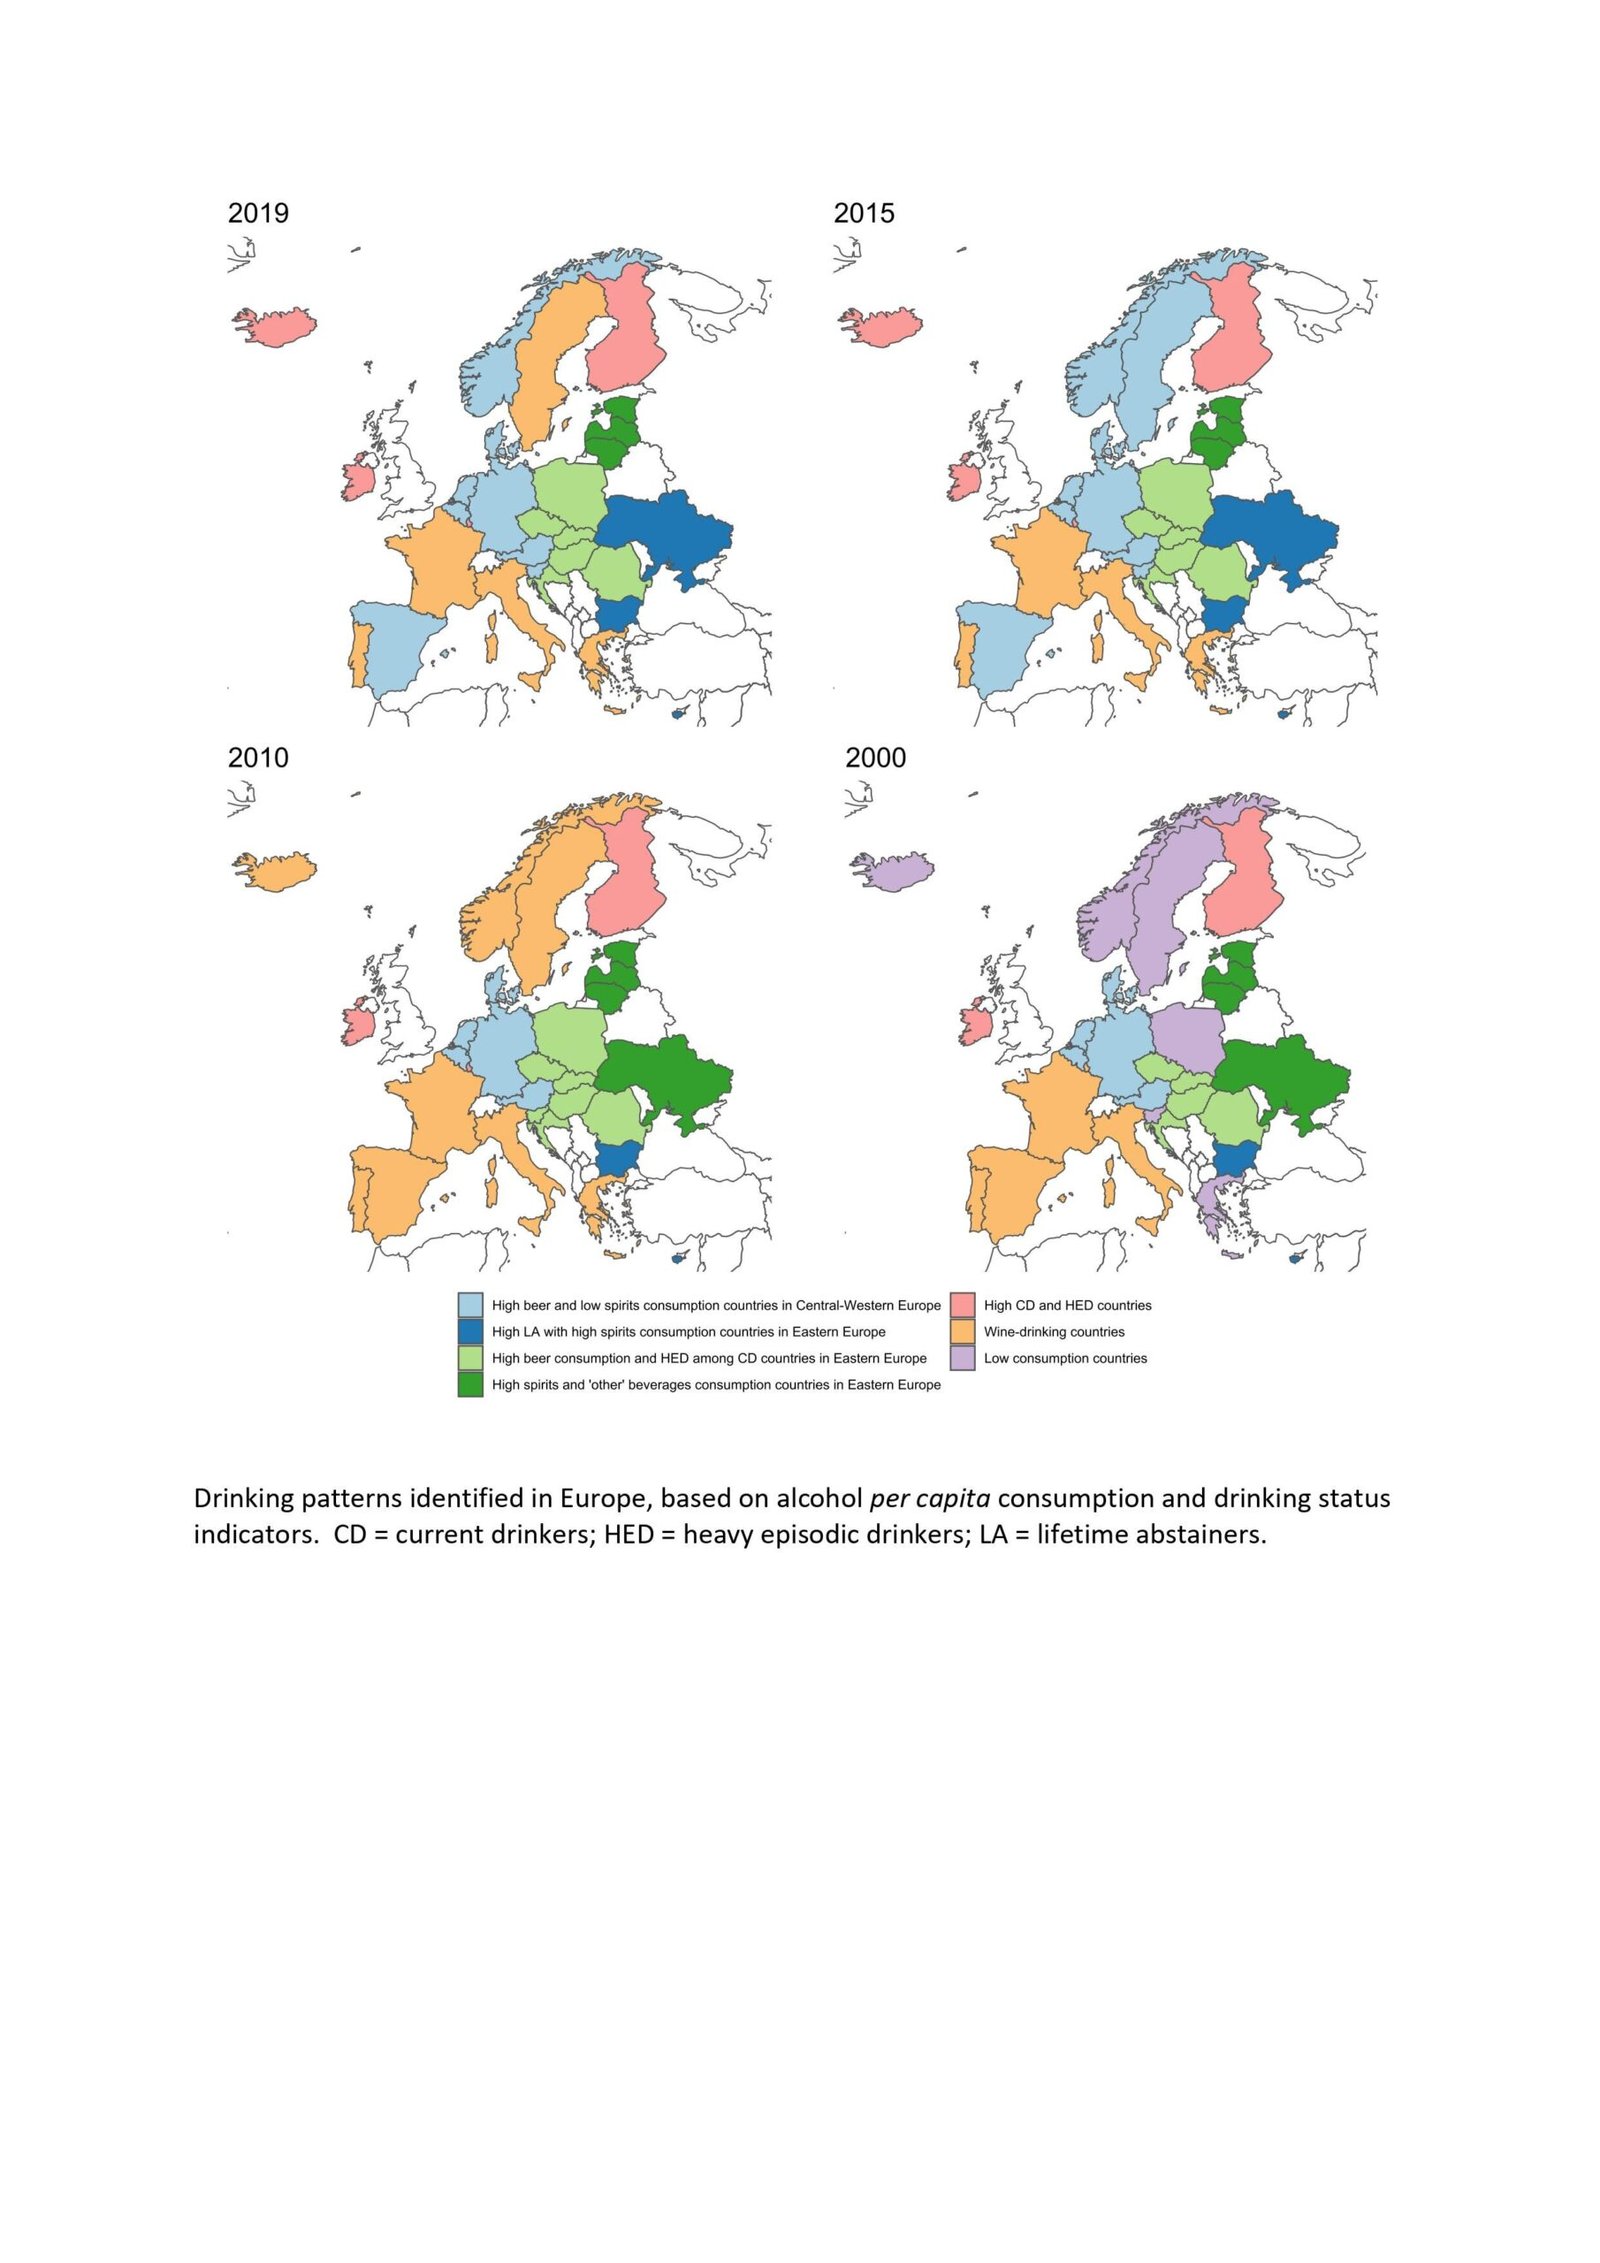 European countries differ in their drinking styles study finds